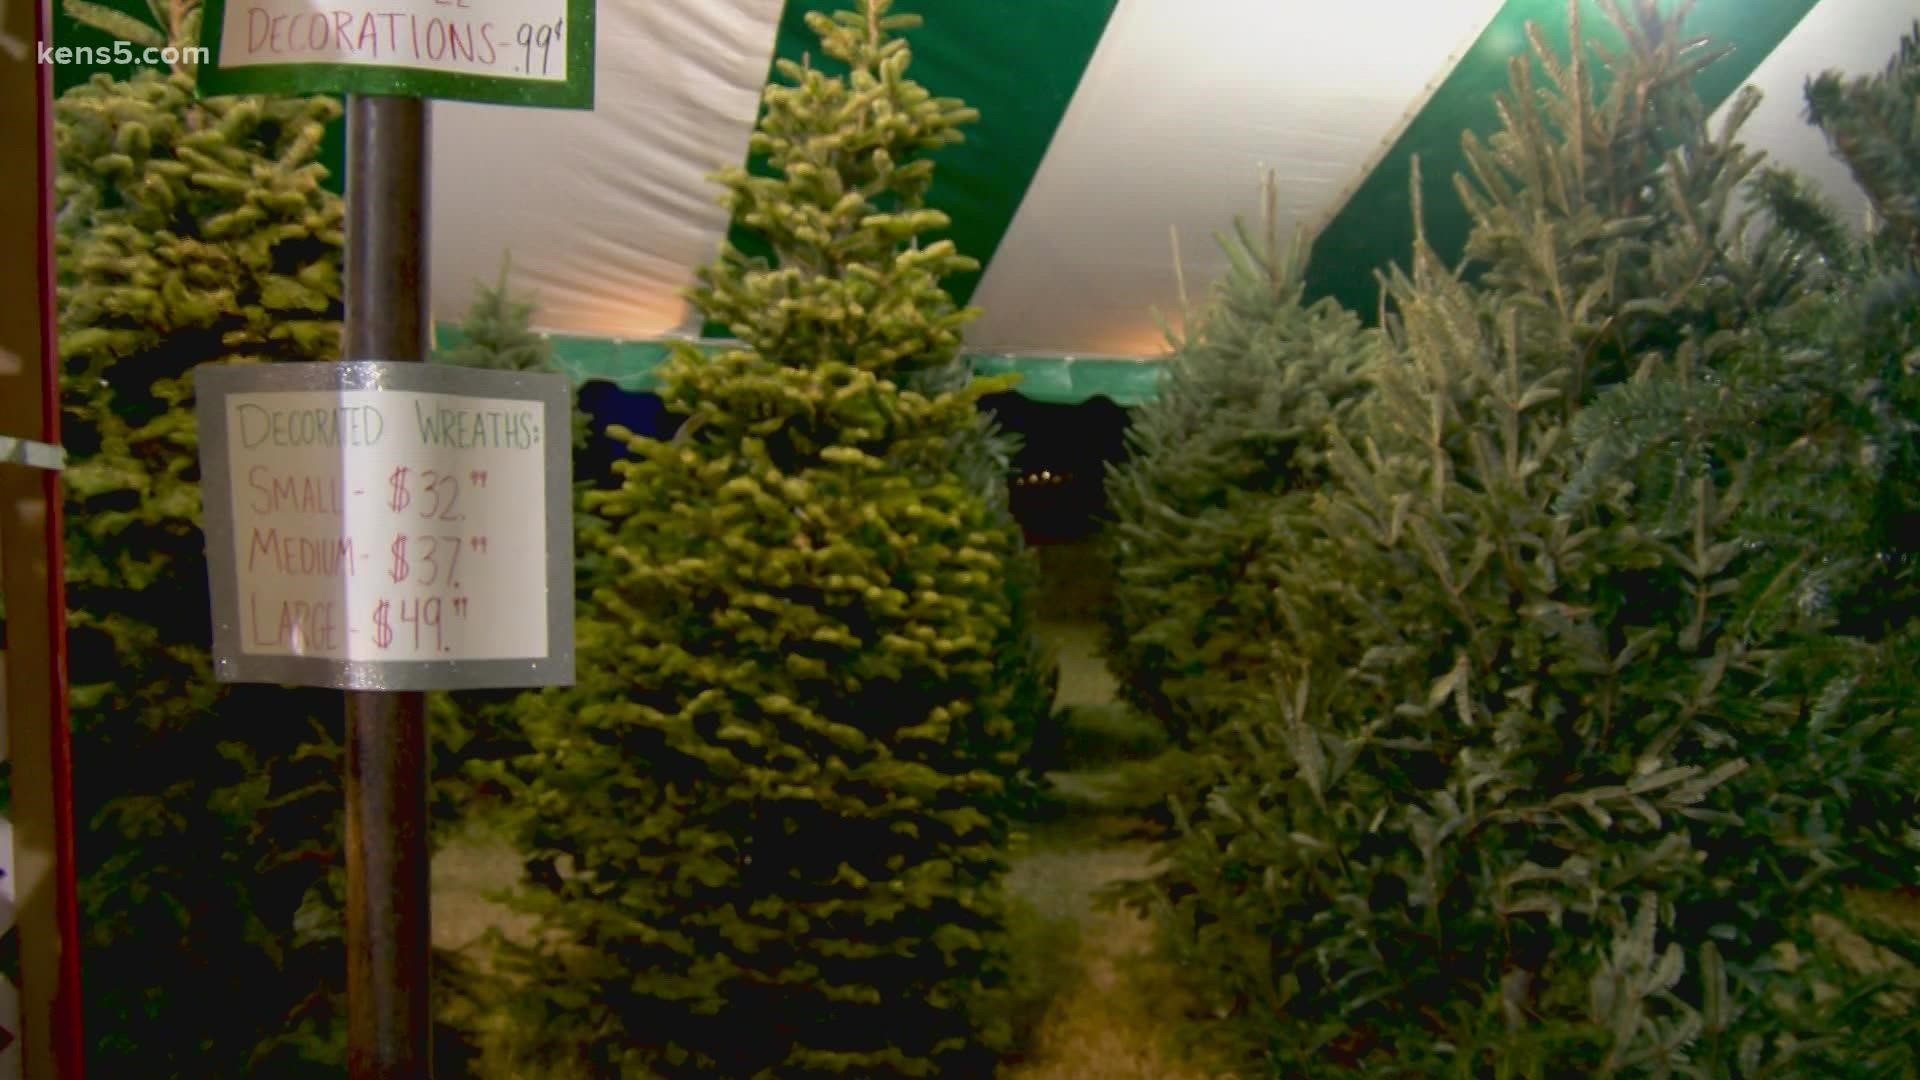 Contemplating on getting a Christmas tree this year? You may want to hurry up and make a decision. The demand is high, and the prices are on the rise, too.